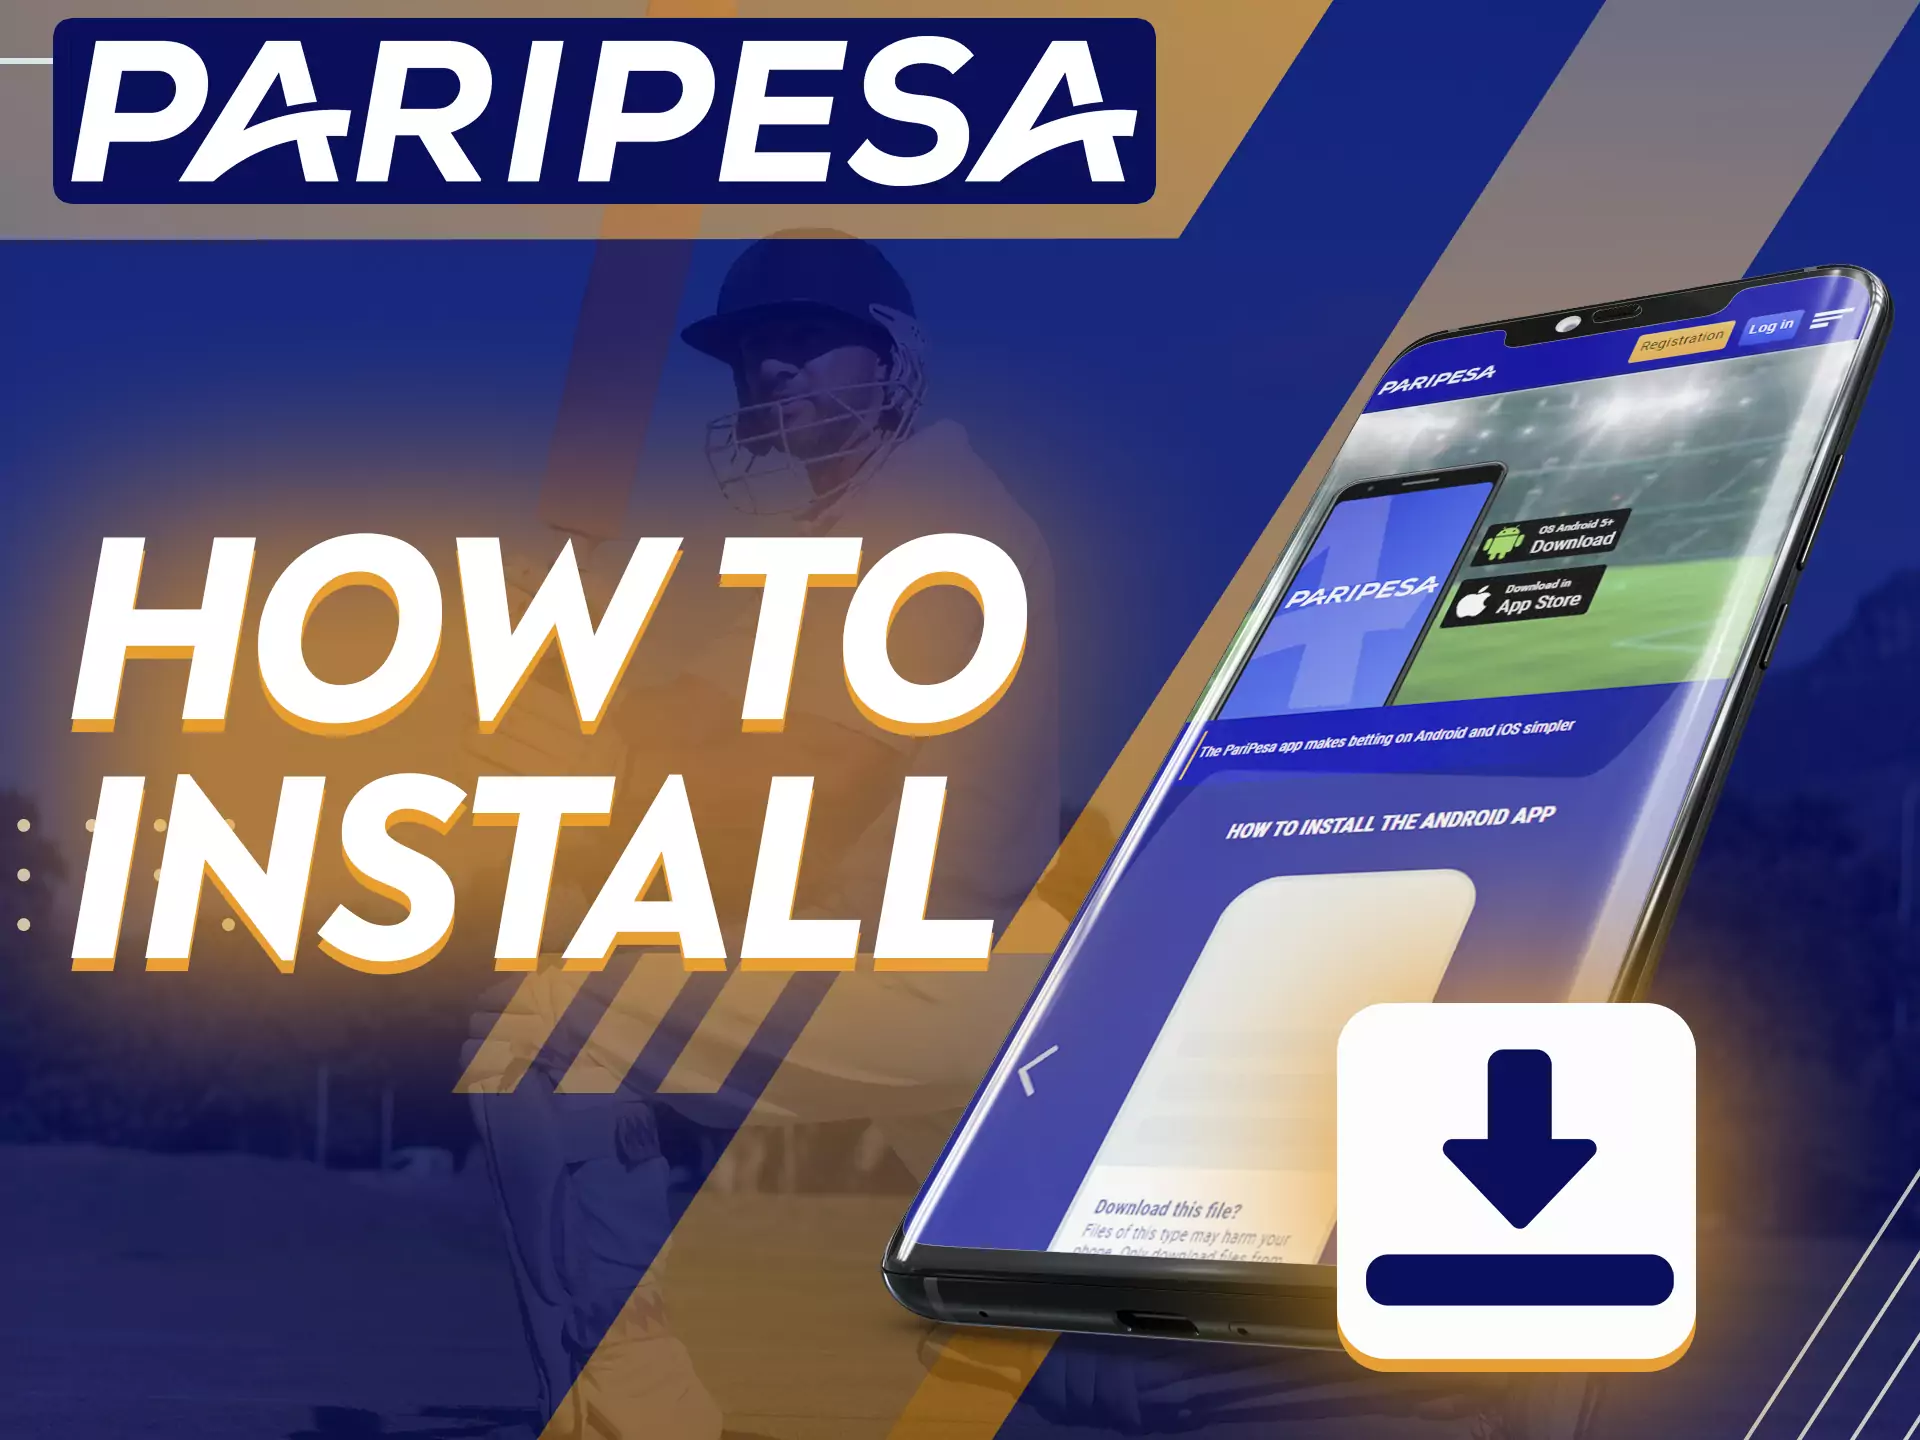 Learn how to simply install the Paripesa app on your phone.